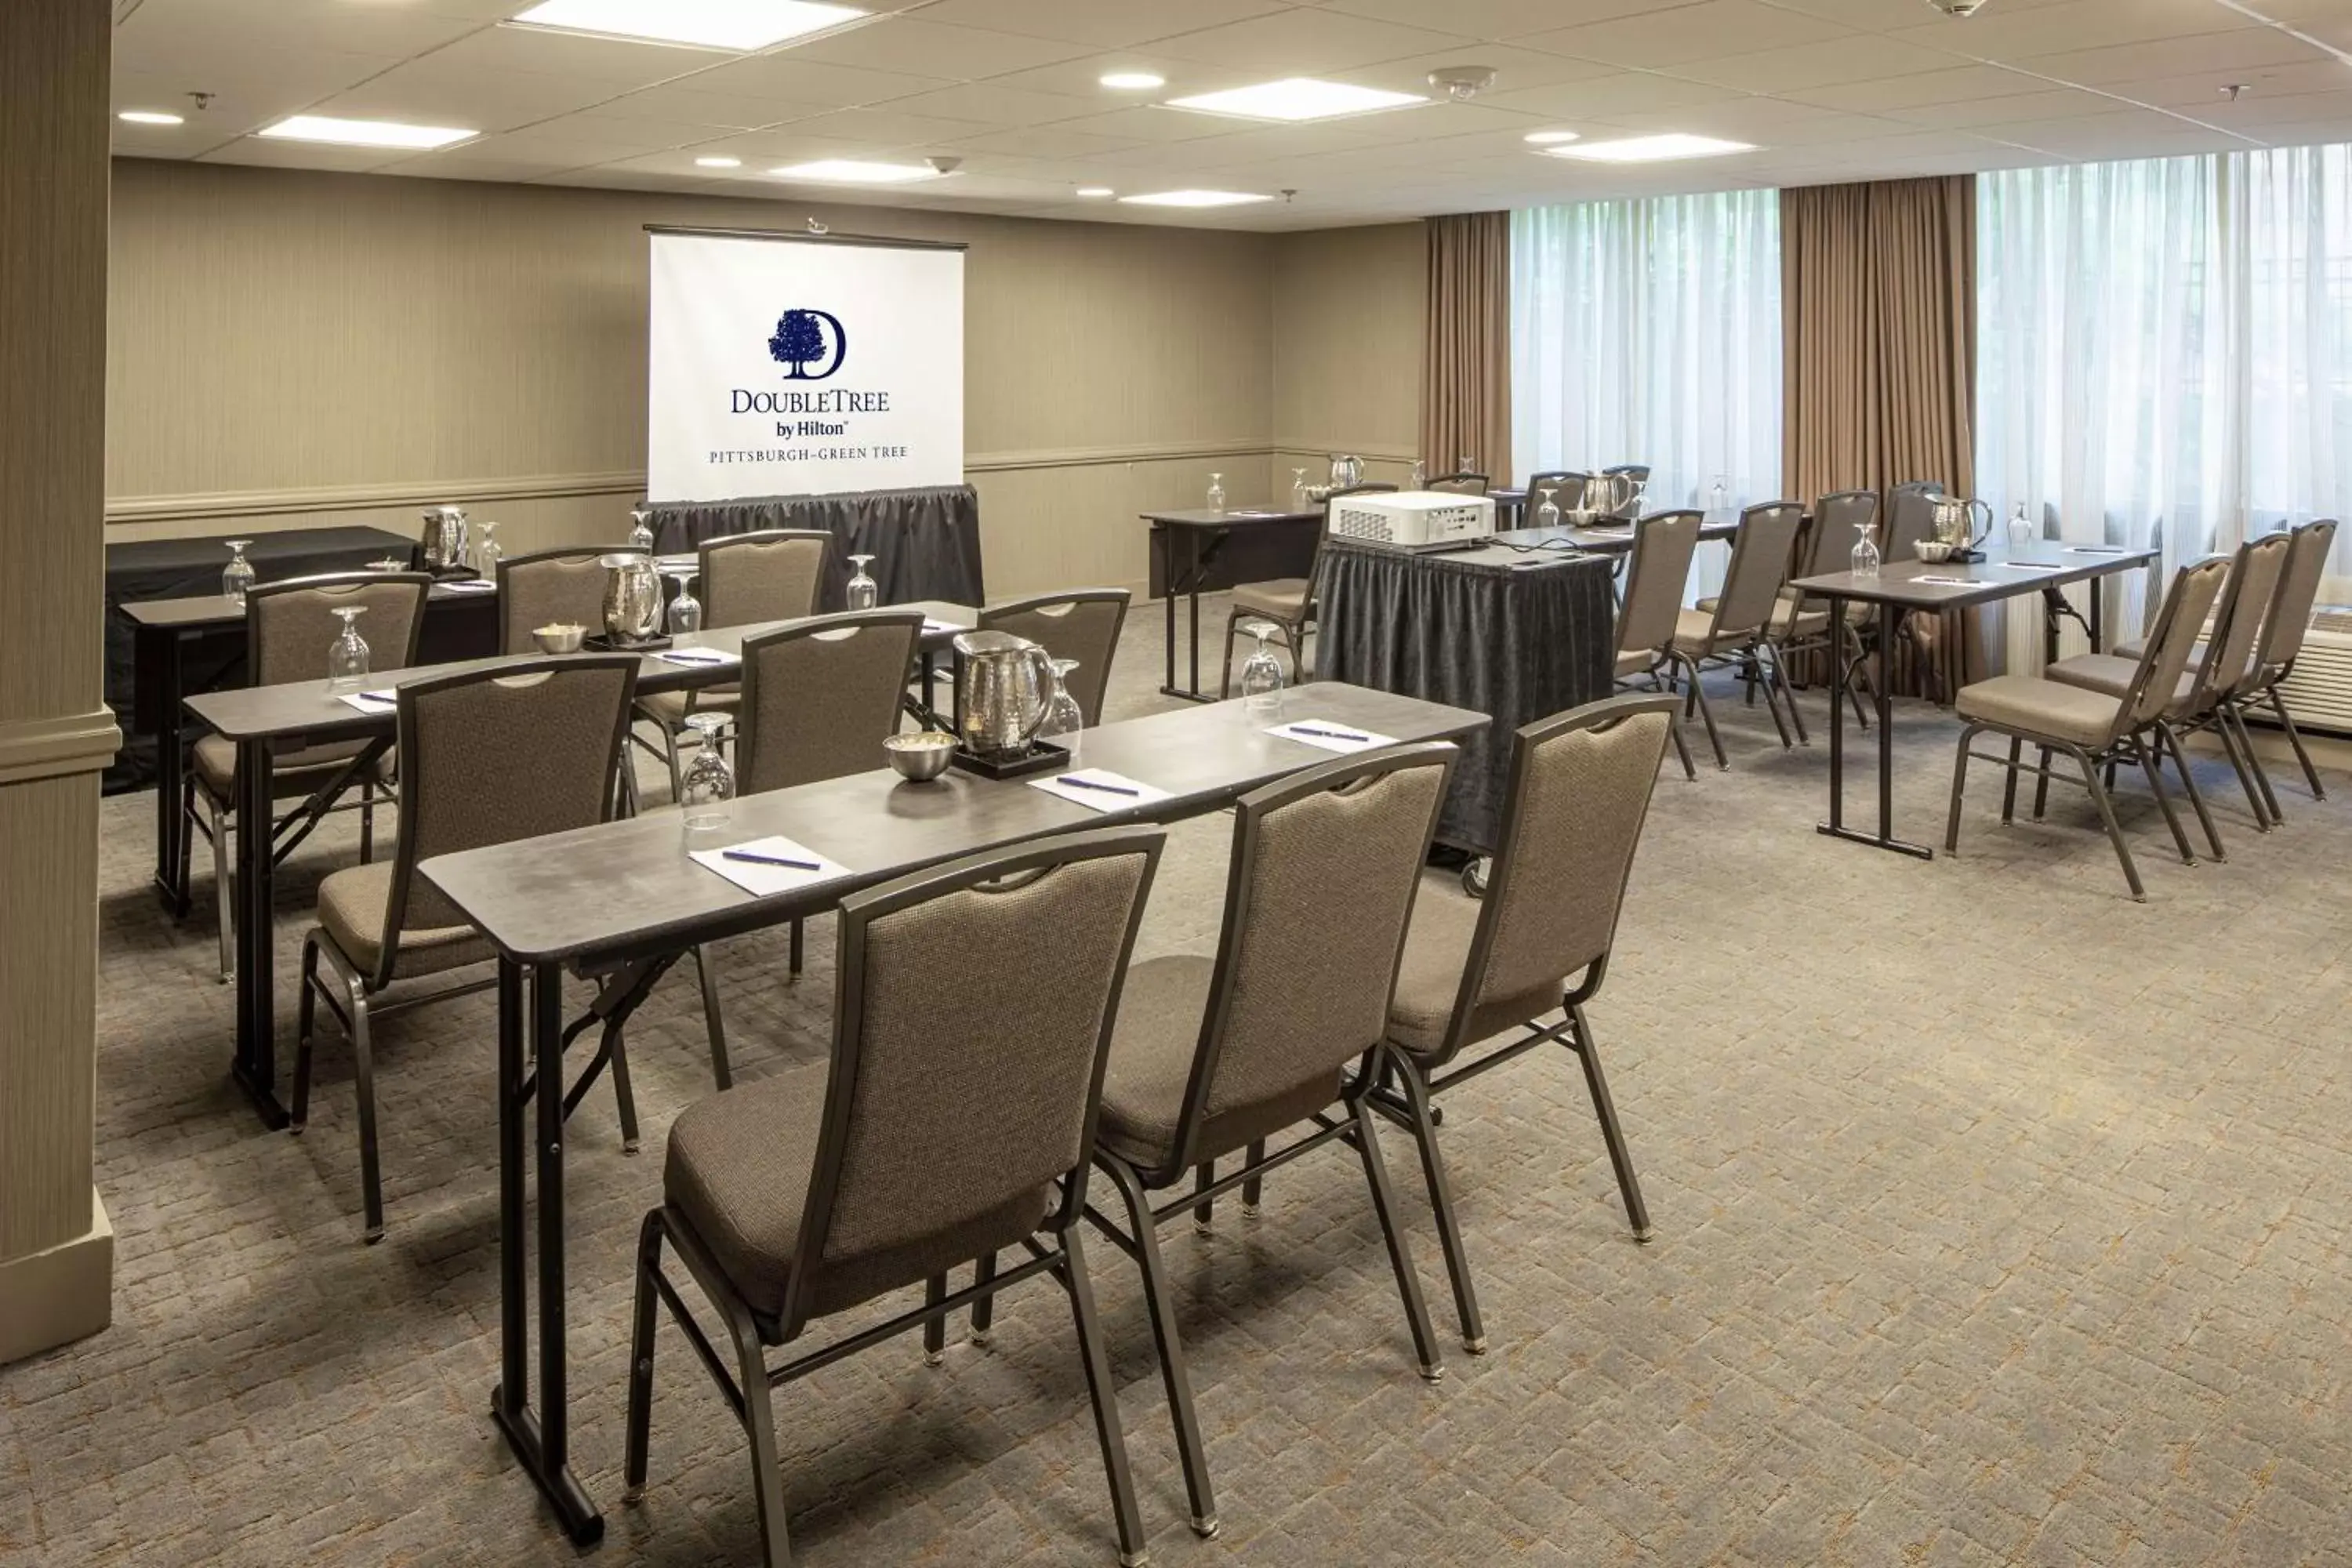 Meeting/conference room in DoubleTree by Hilton Pittsburgh-Green Tree